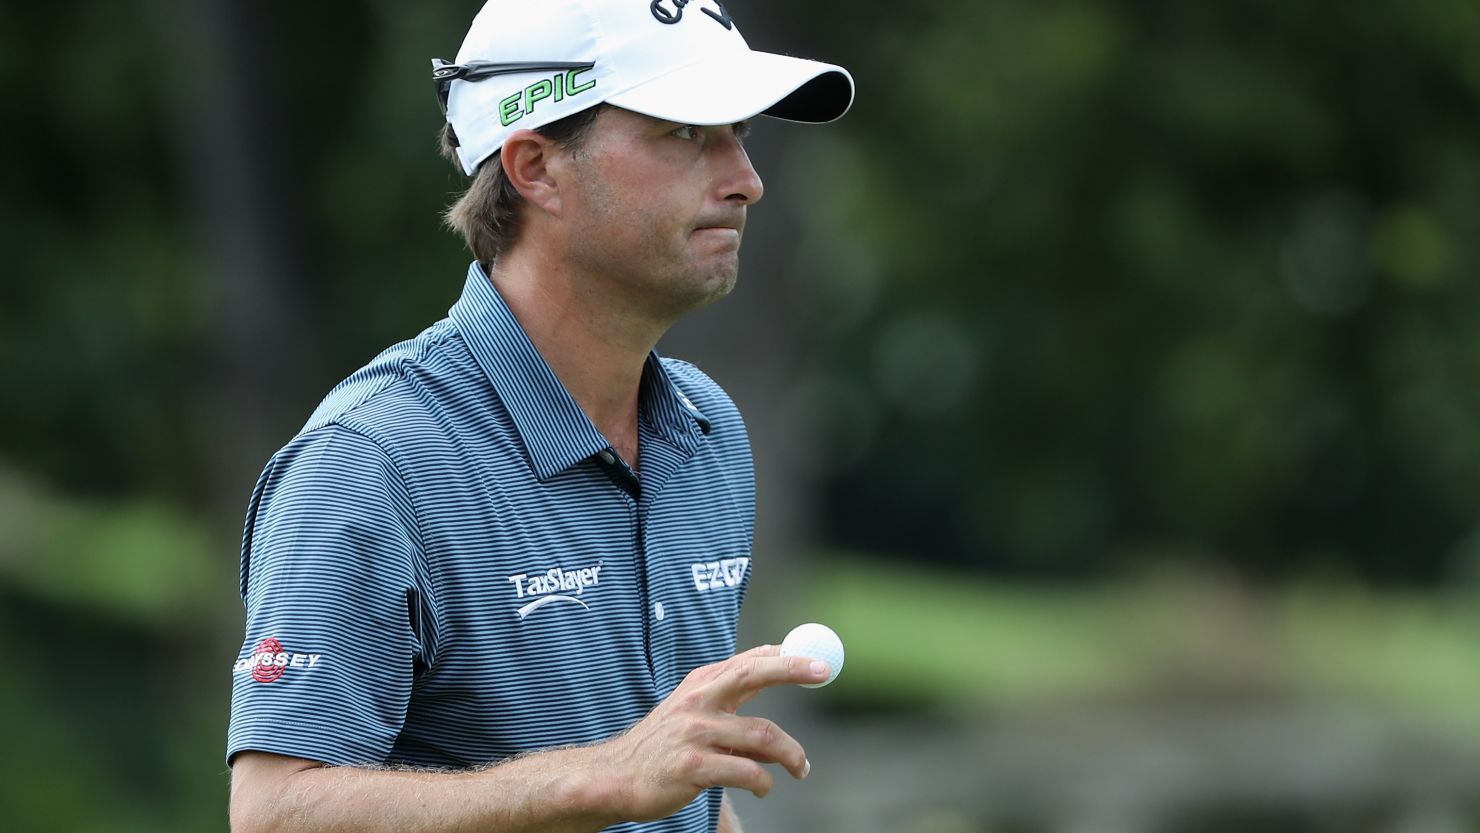 Kevin Kisner combined fine play from tee to green with solid putting to maintain his lead at the US PGA Championship.